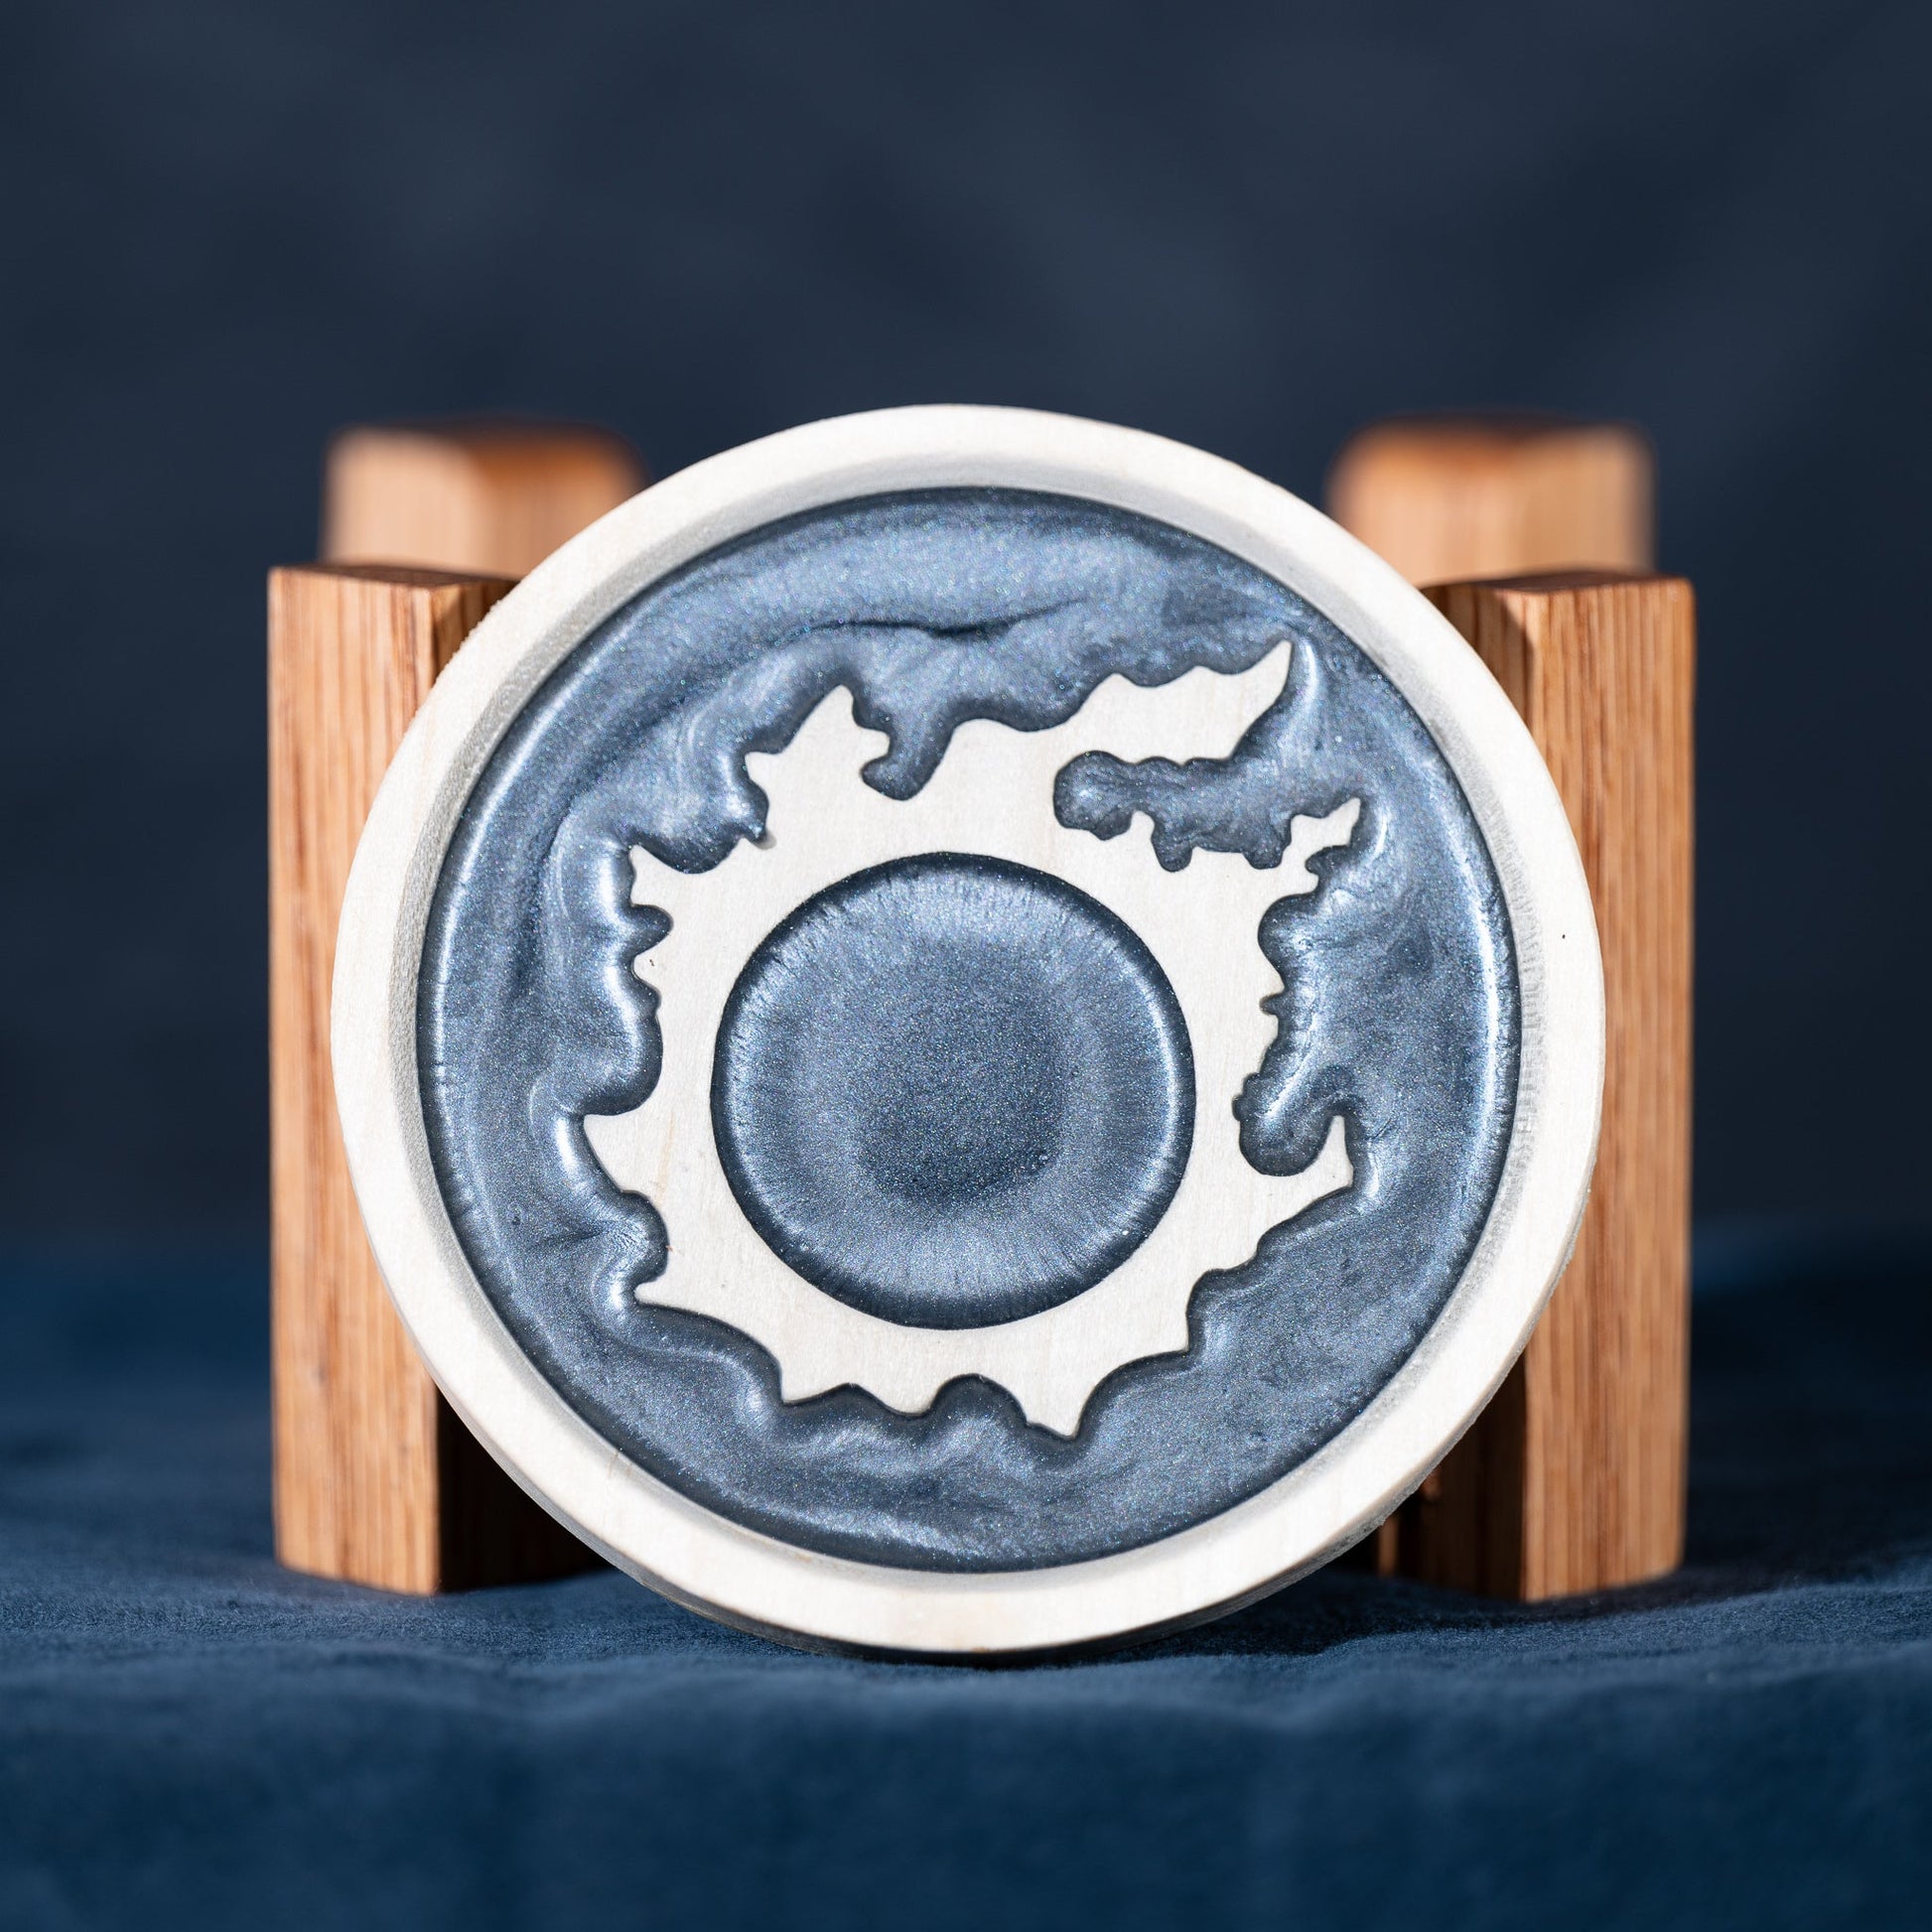 Handmade Final Fantasy carved wood and resin Meteor drink coaster